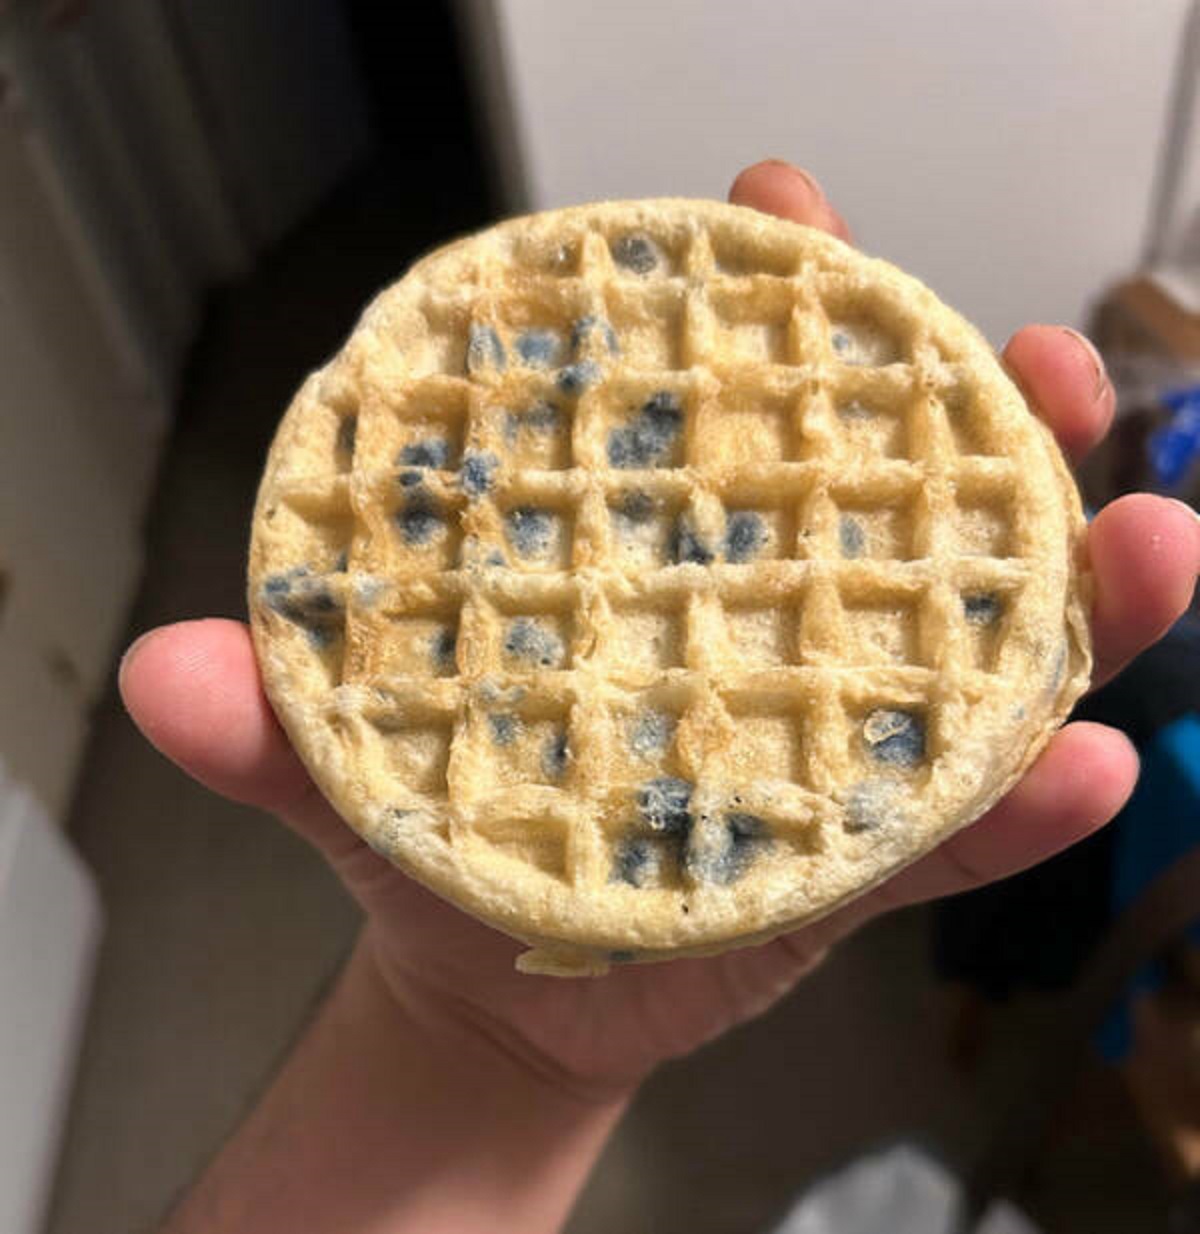 “I’ve eaten 2 blueberry waffles, then saw the package was for the plain waffles. I ate mold.”